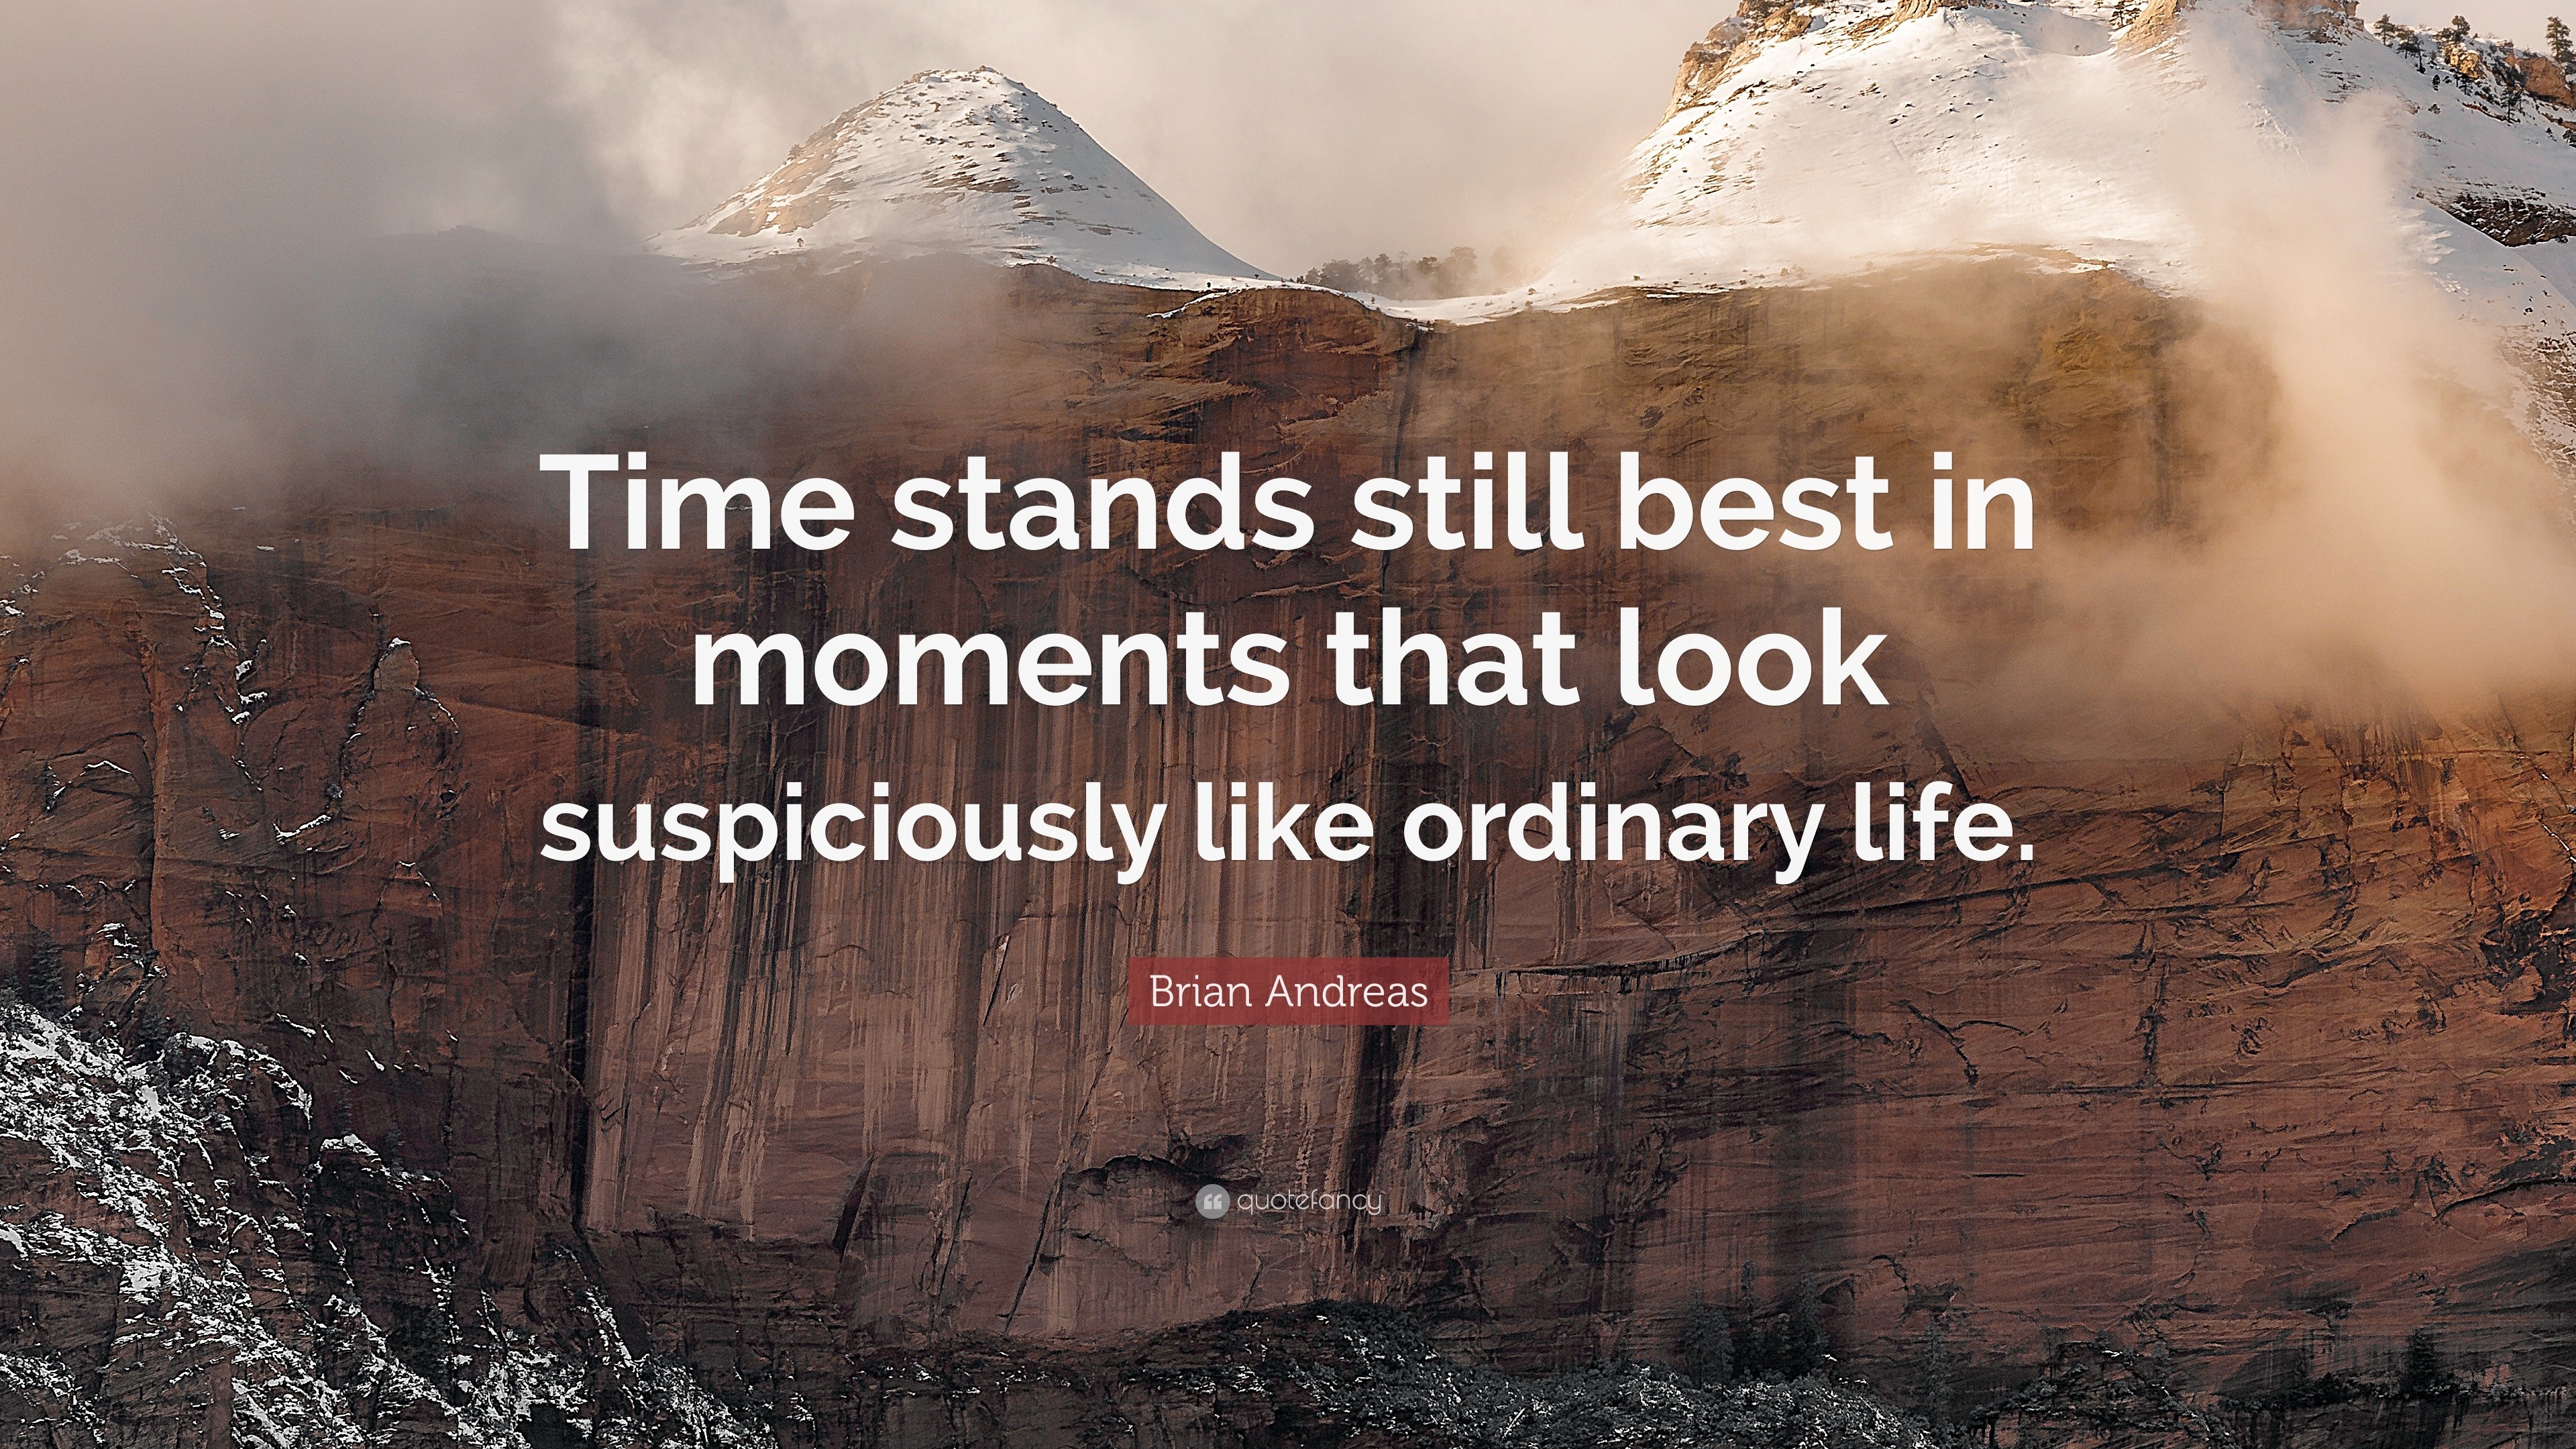 Brian Andreas Quote “Time stands still best in moments that look suspiciously like ordinary